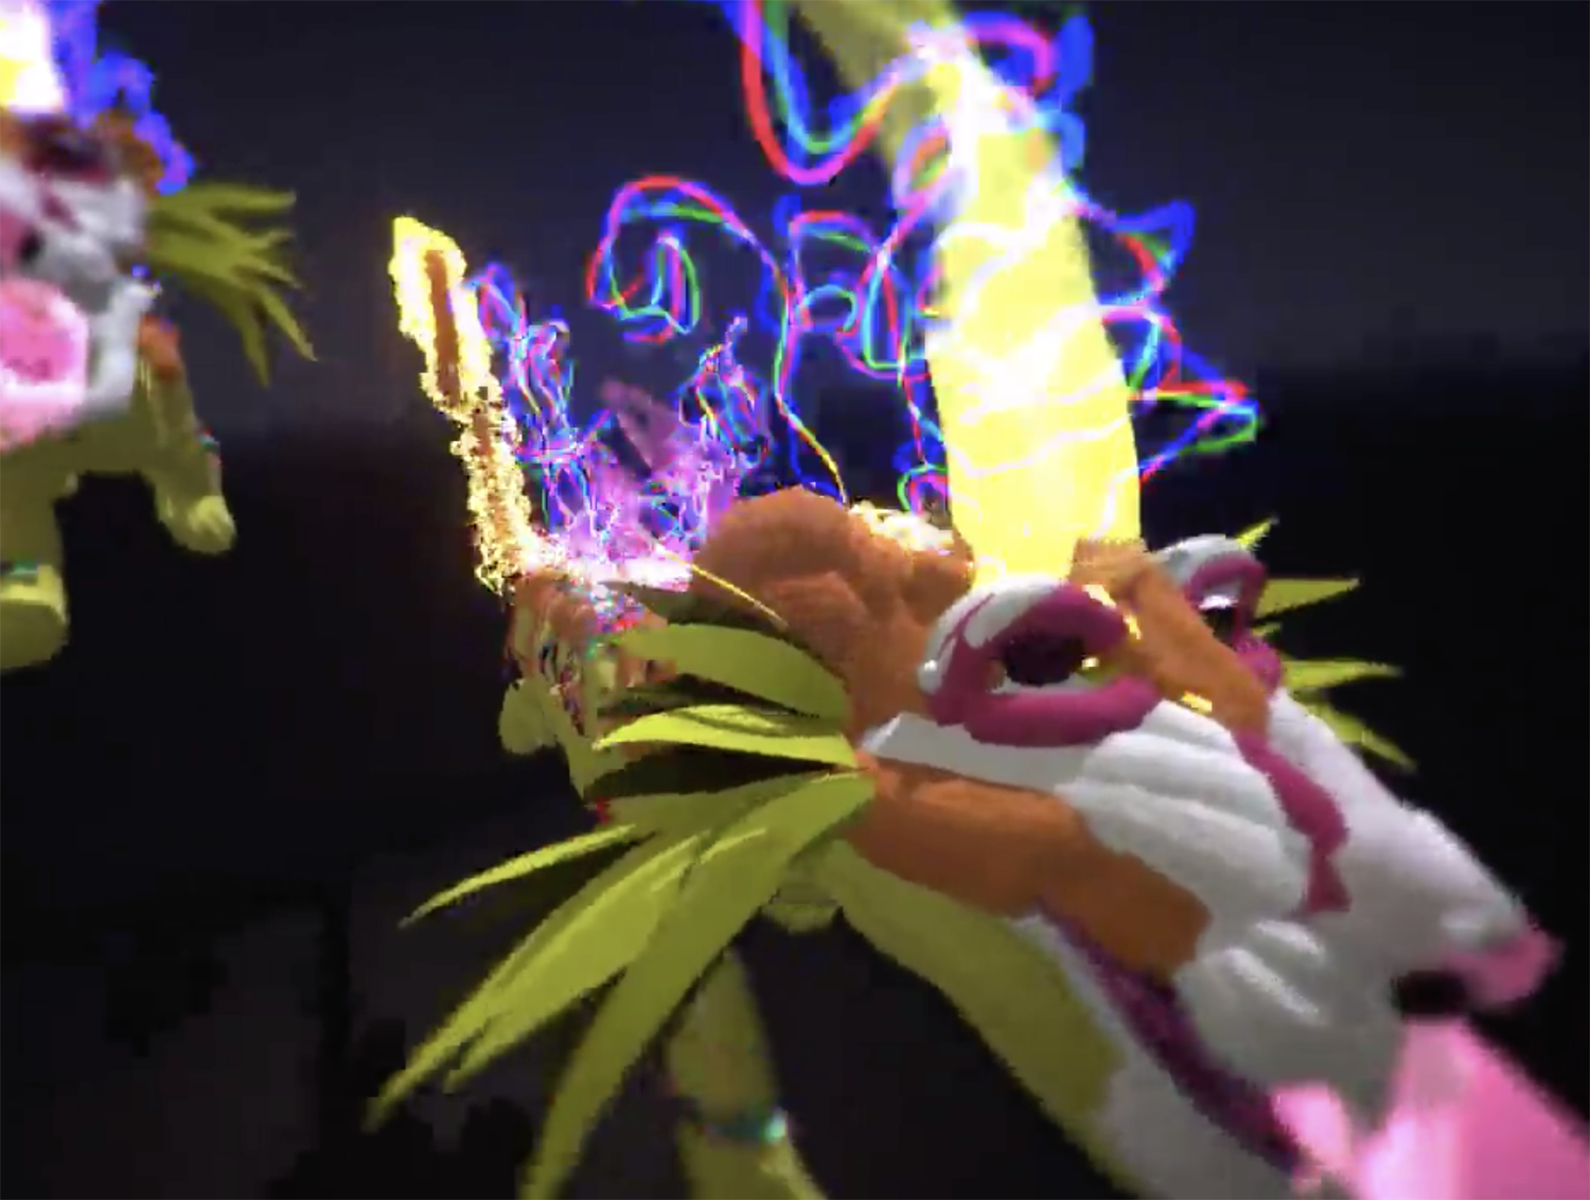 screen grab from the piece feat. 3D fantastic cat